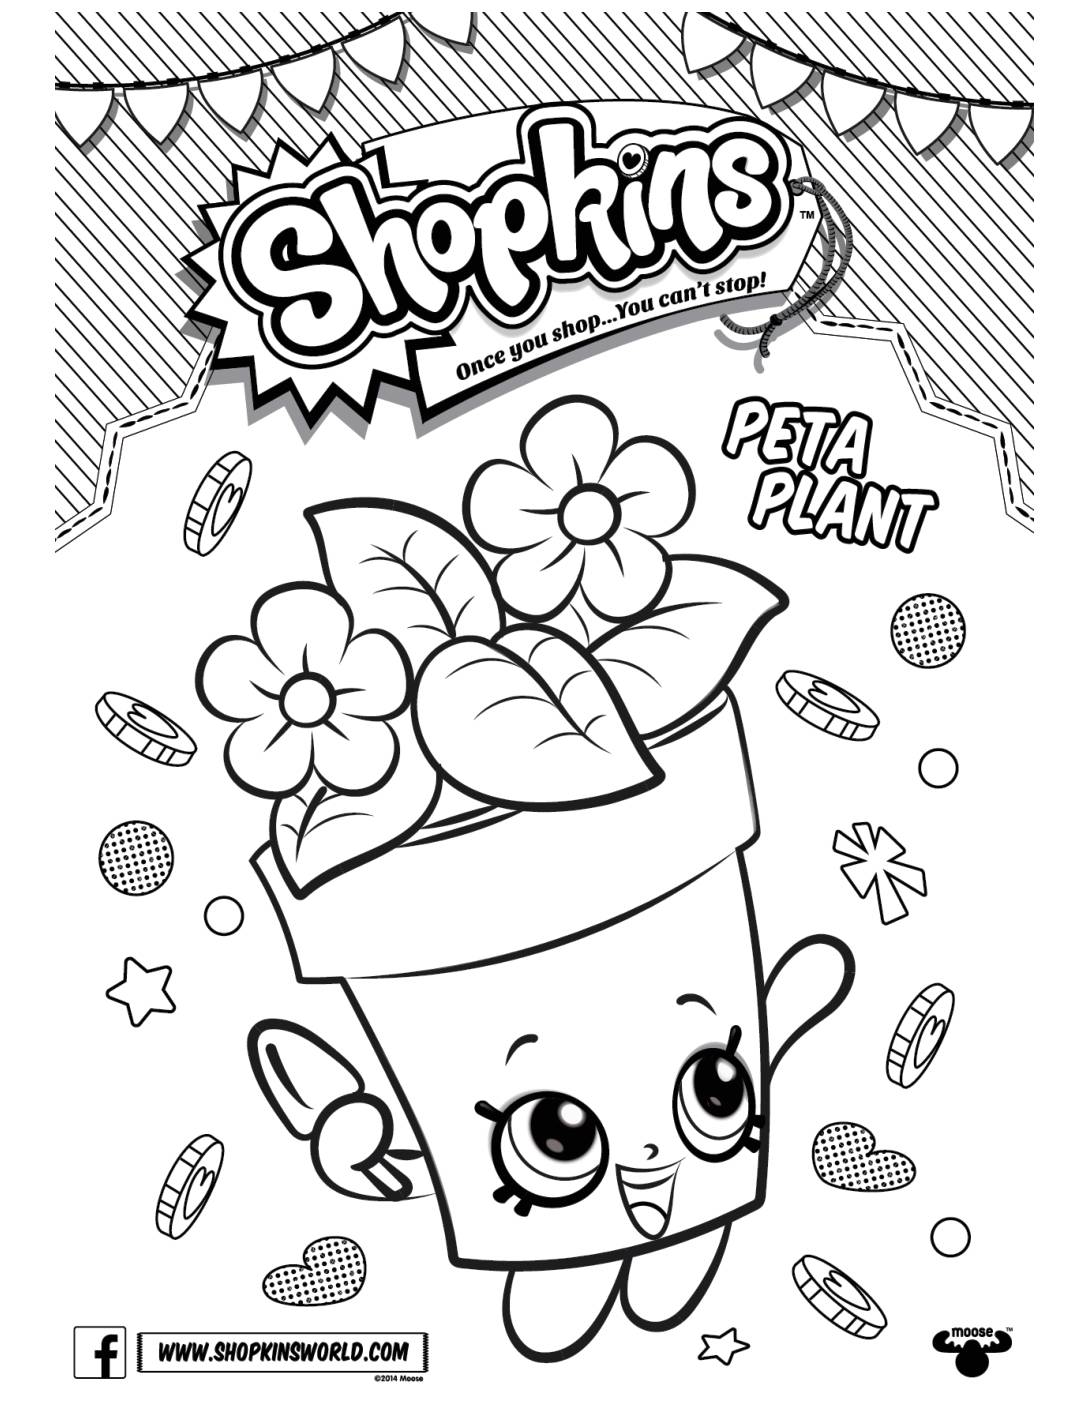 Shopkins Coloring Page 21